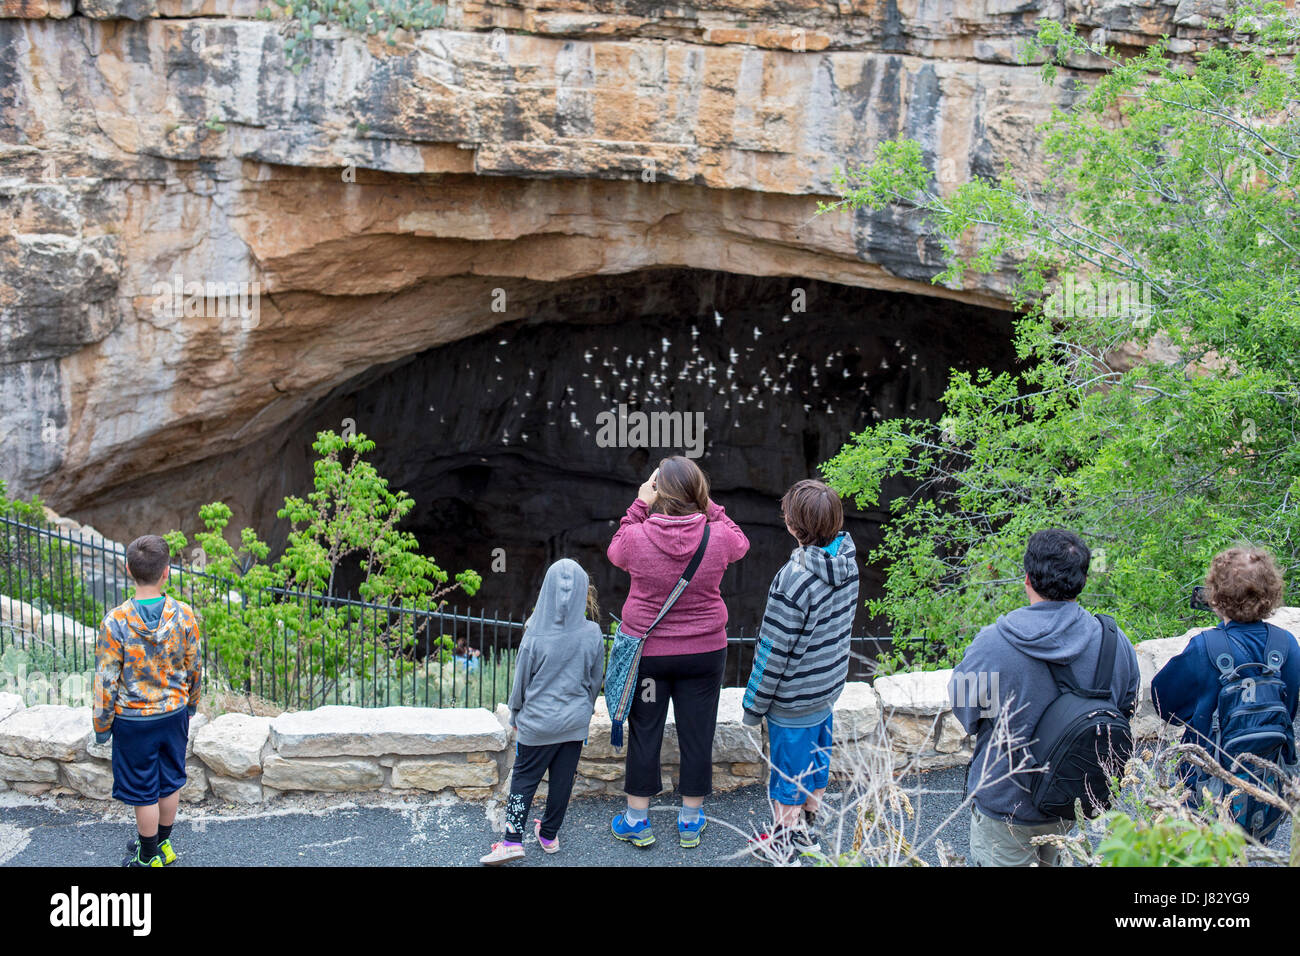 Carlsbad Caverns National Park, New Mexico - Tourists watch cave swallows (Petrochelidon fulva) flying out of the natural entrance to Carlsbad Caverns Stock Photo